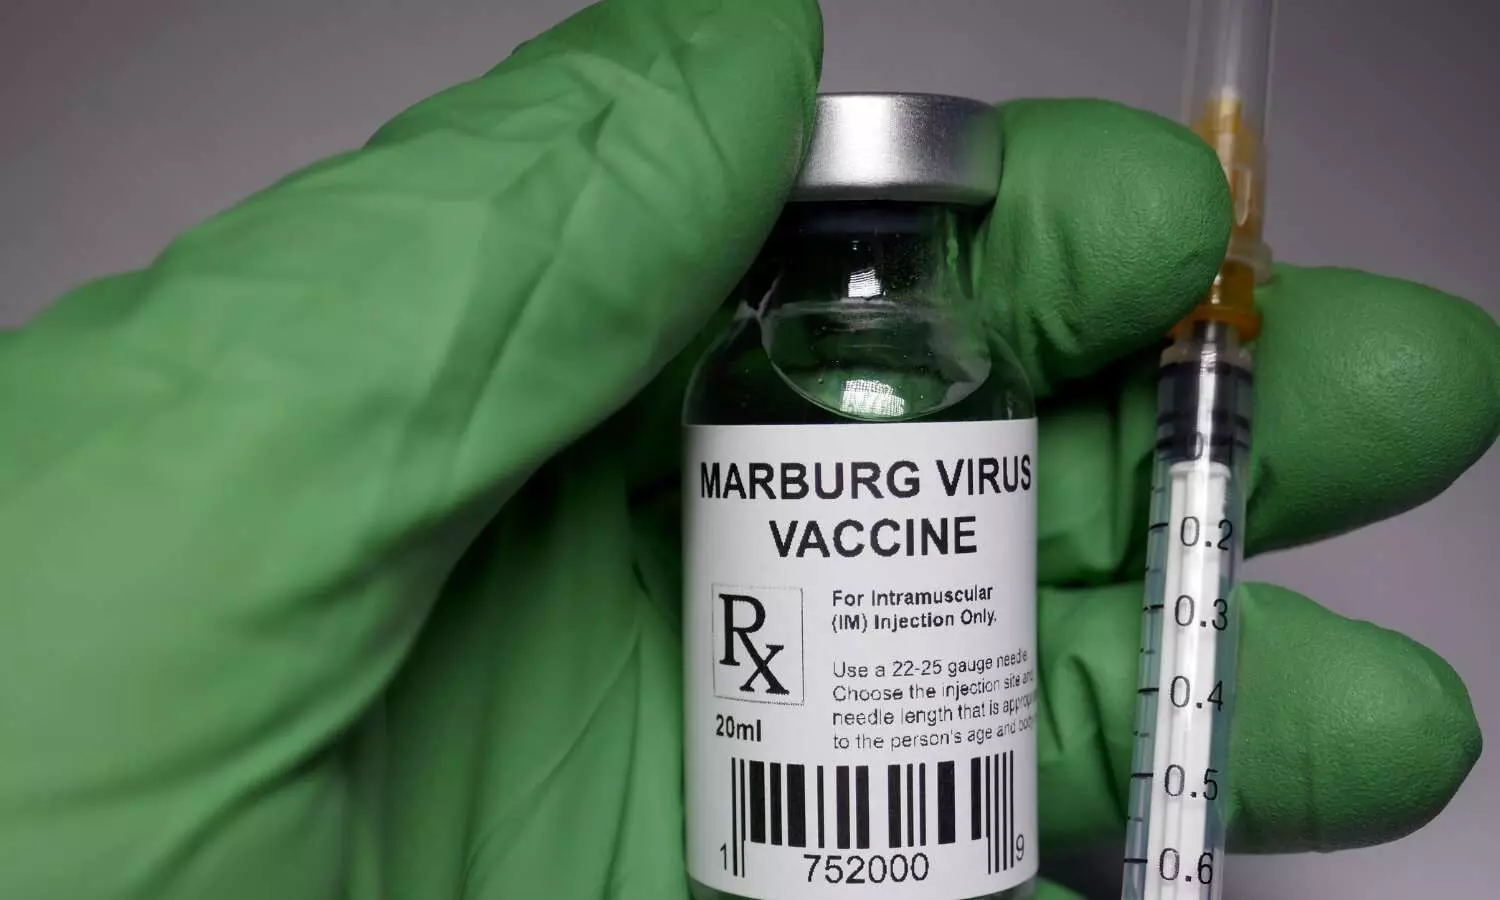 Marburg vaccine shows promising results in first-in-human study